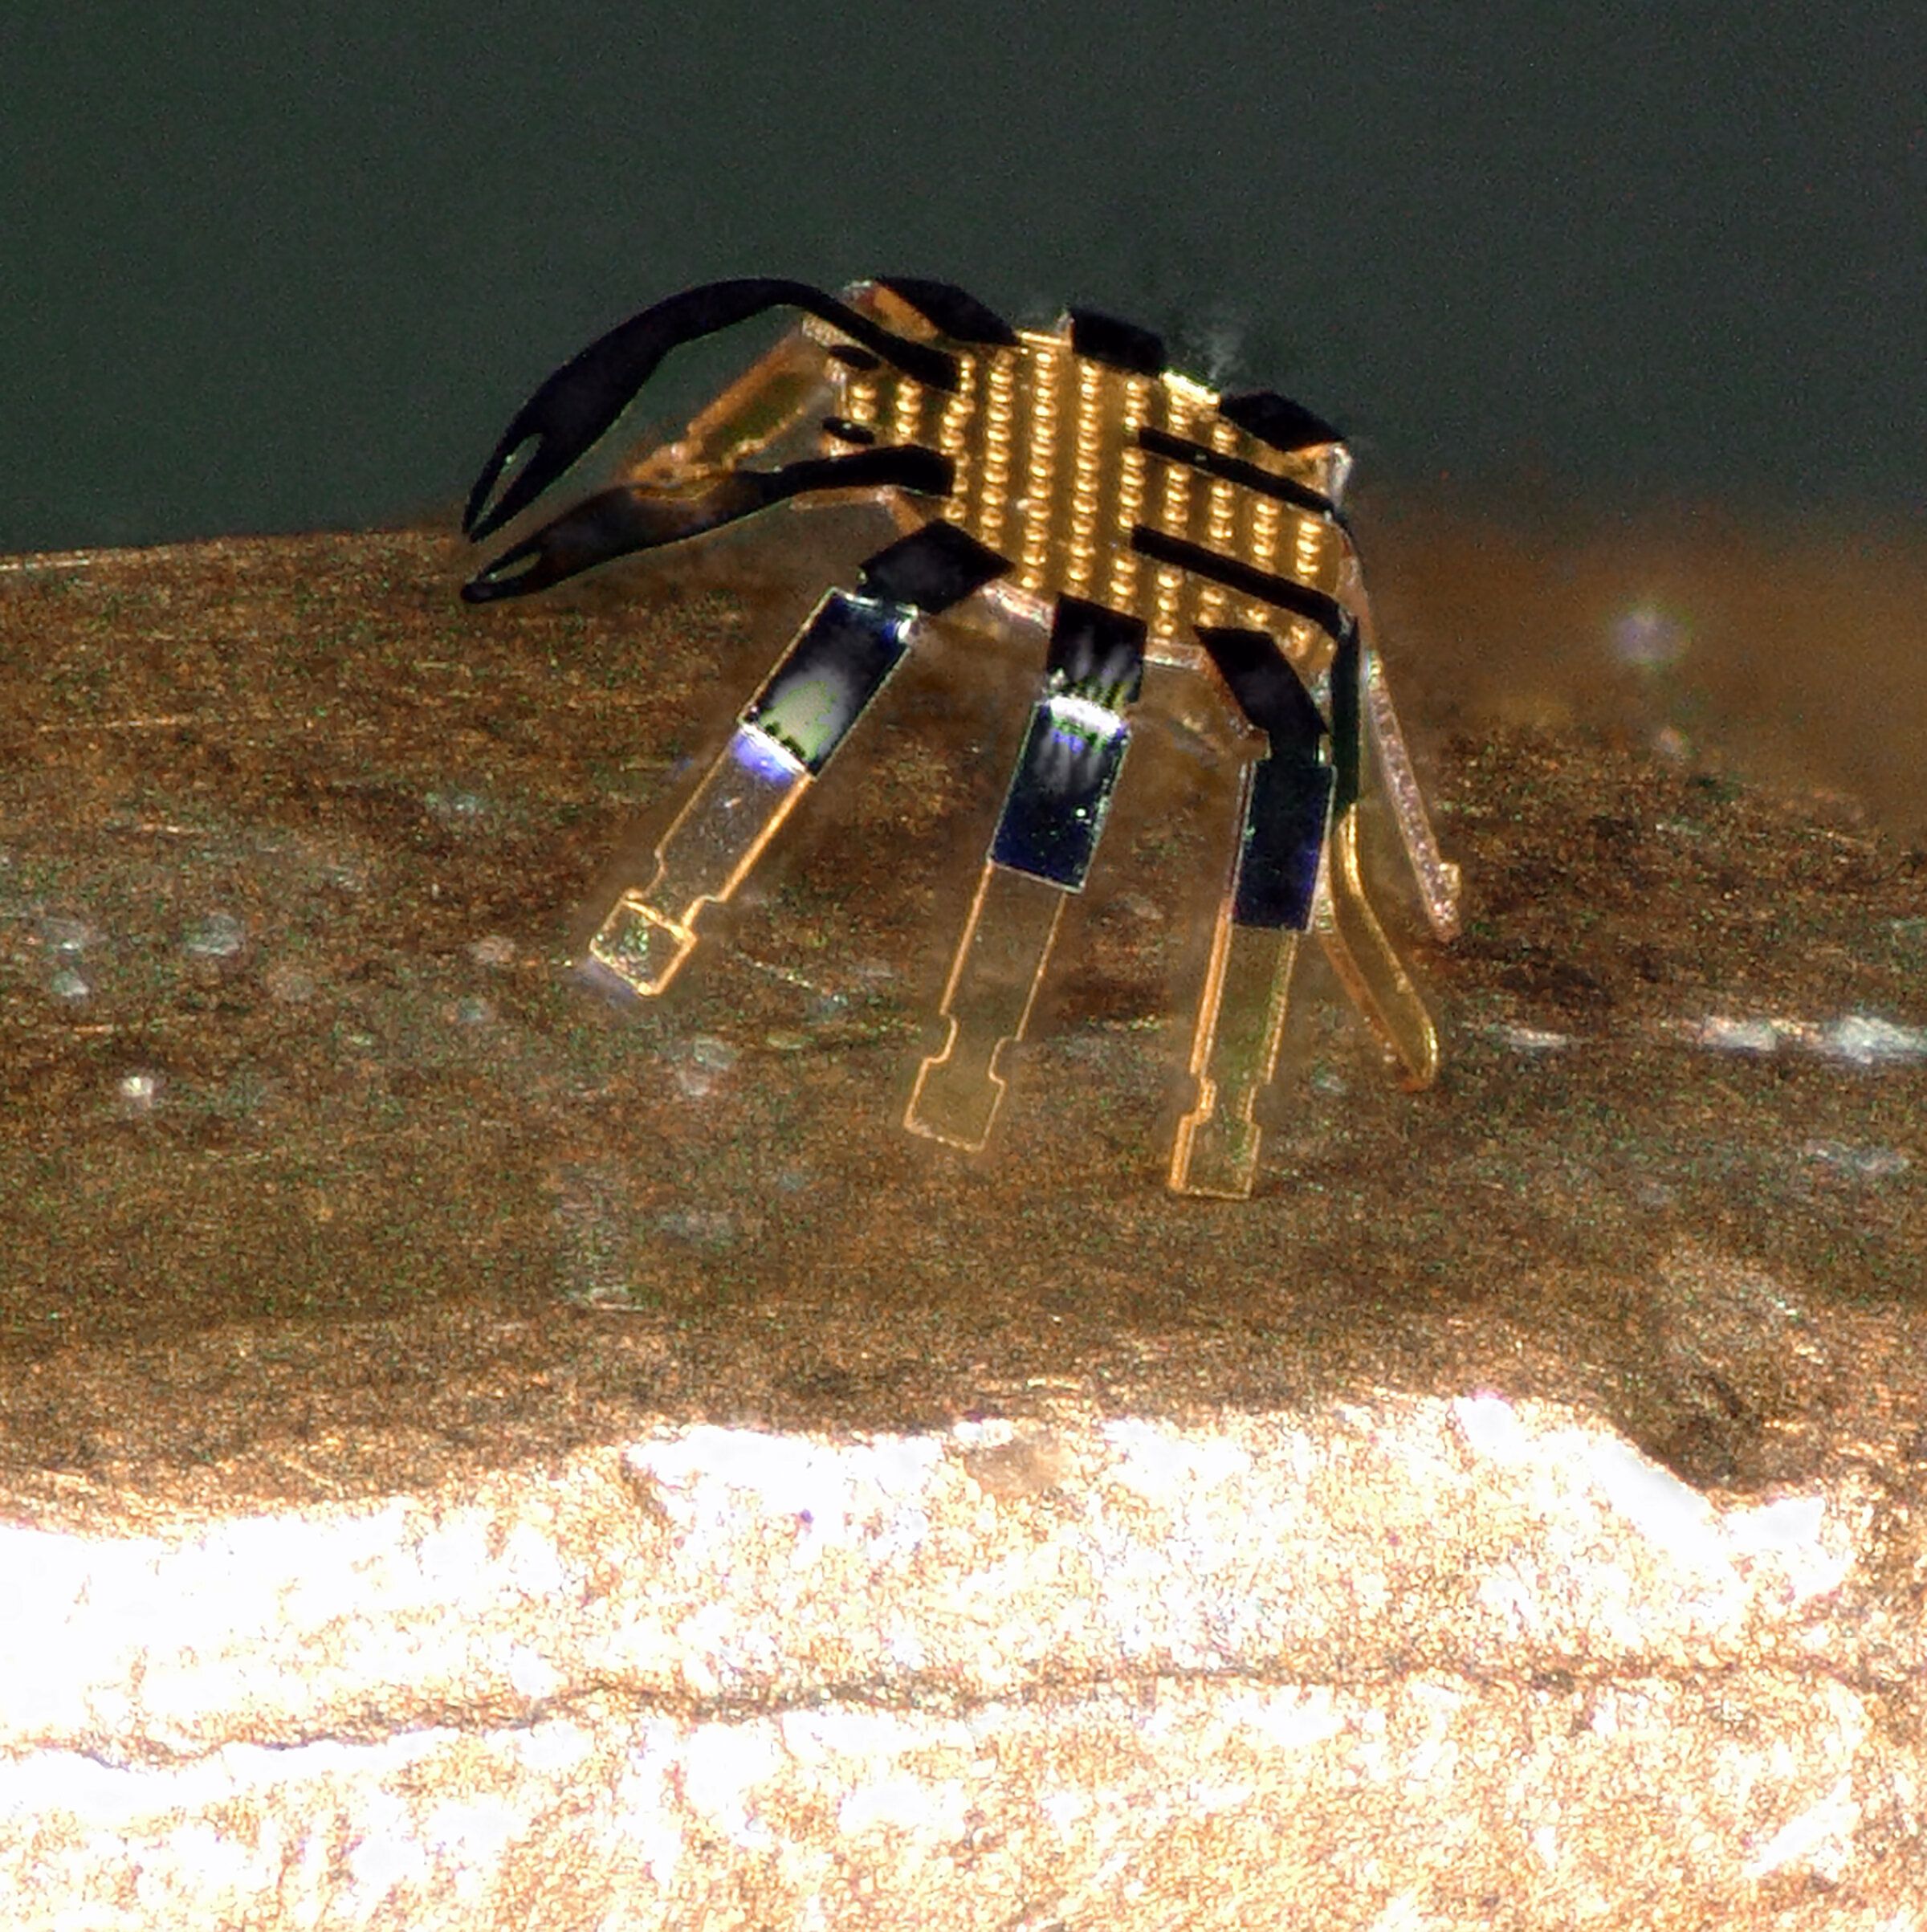 Watch the World's Smallest Remote-Controlled Robot Crab Walk